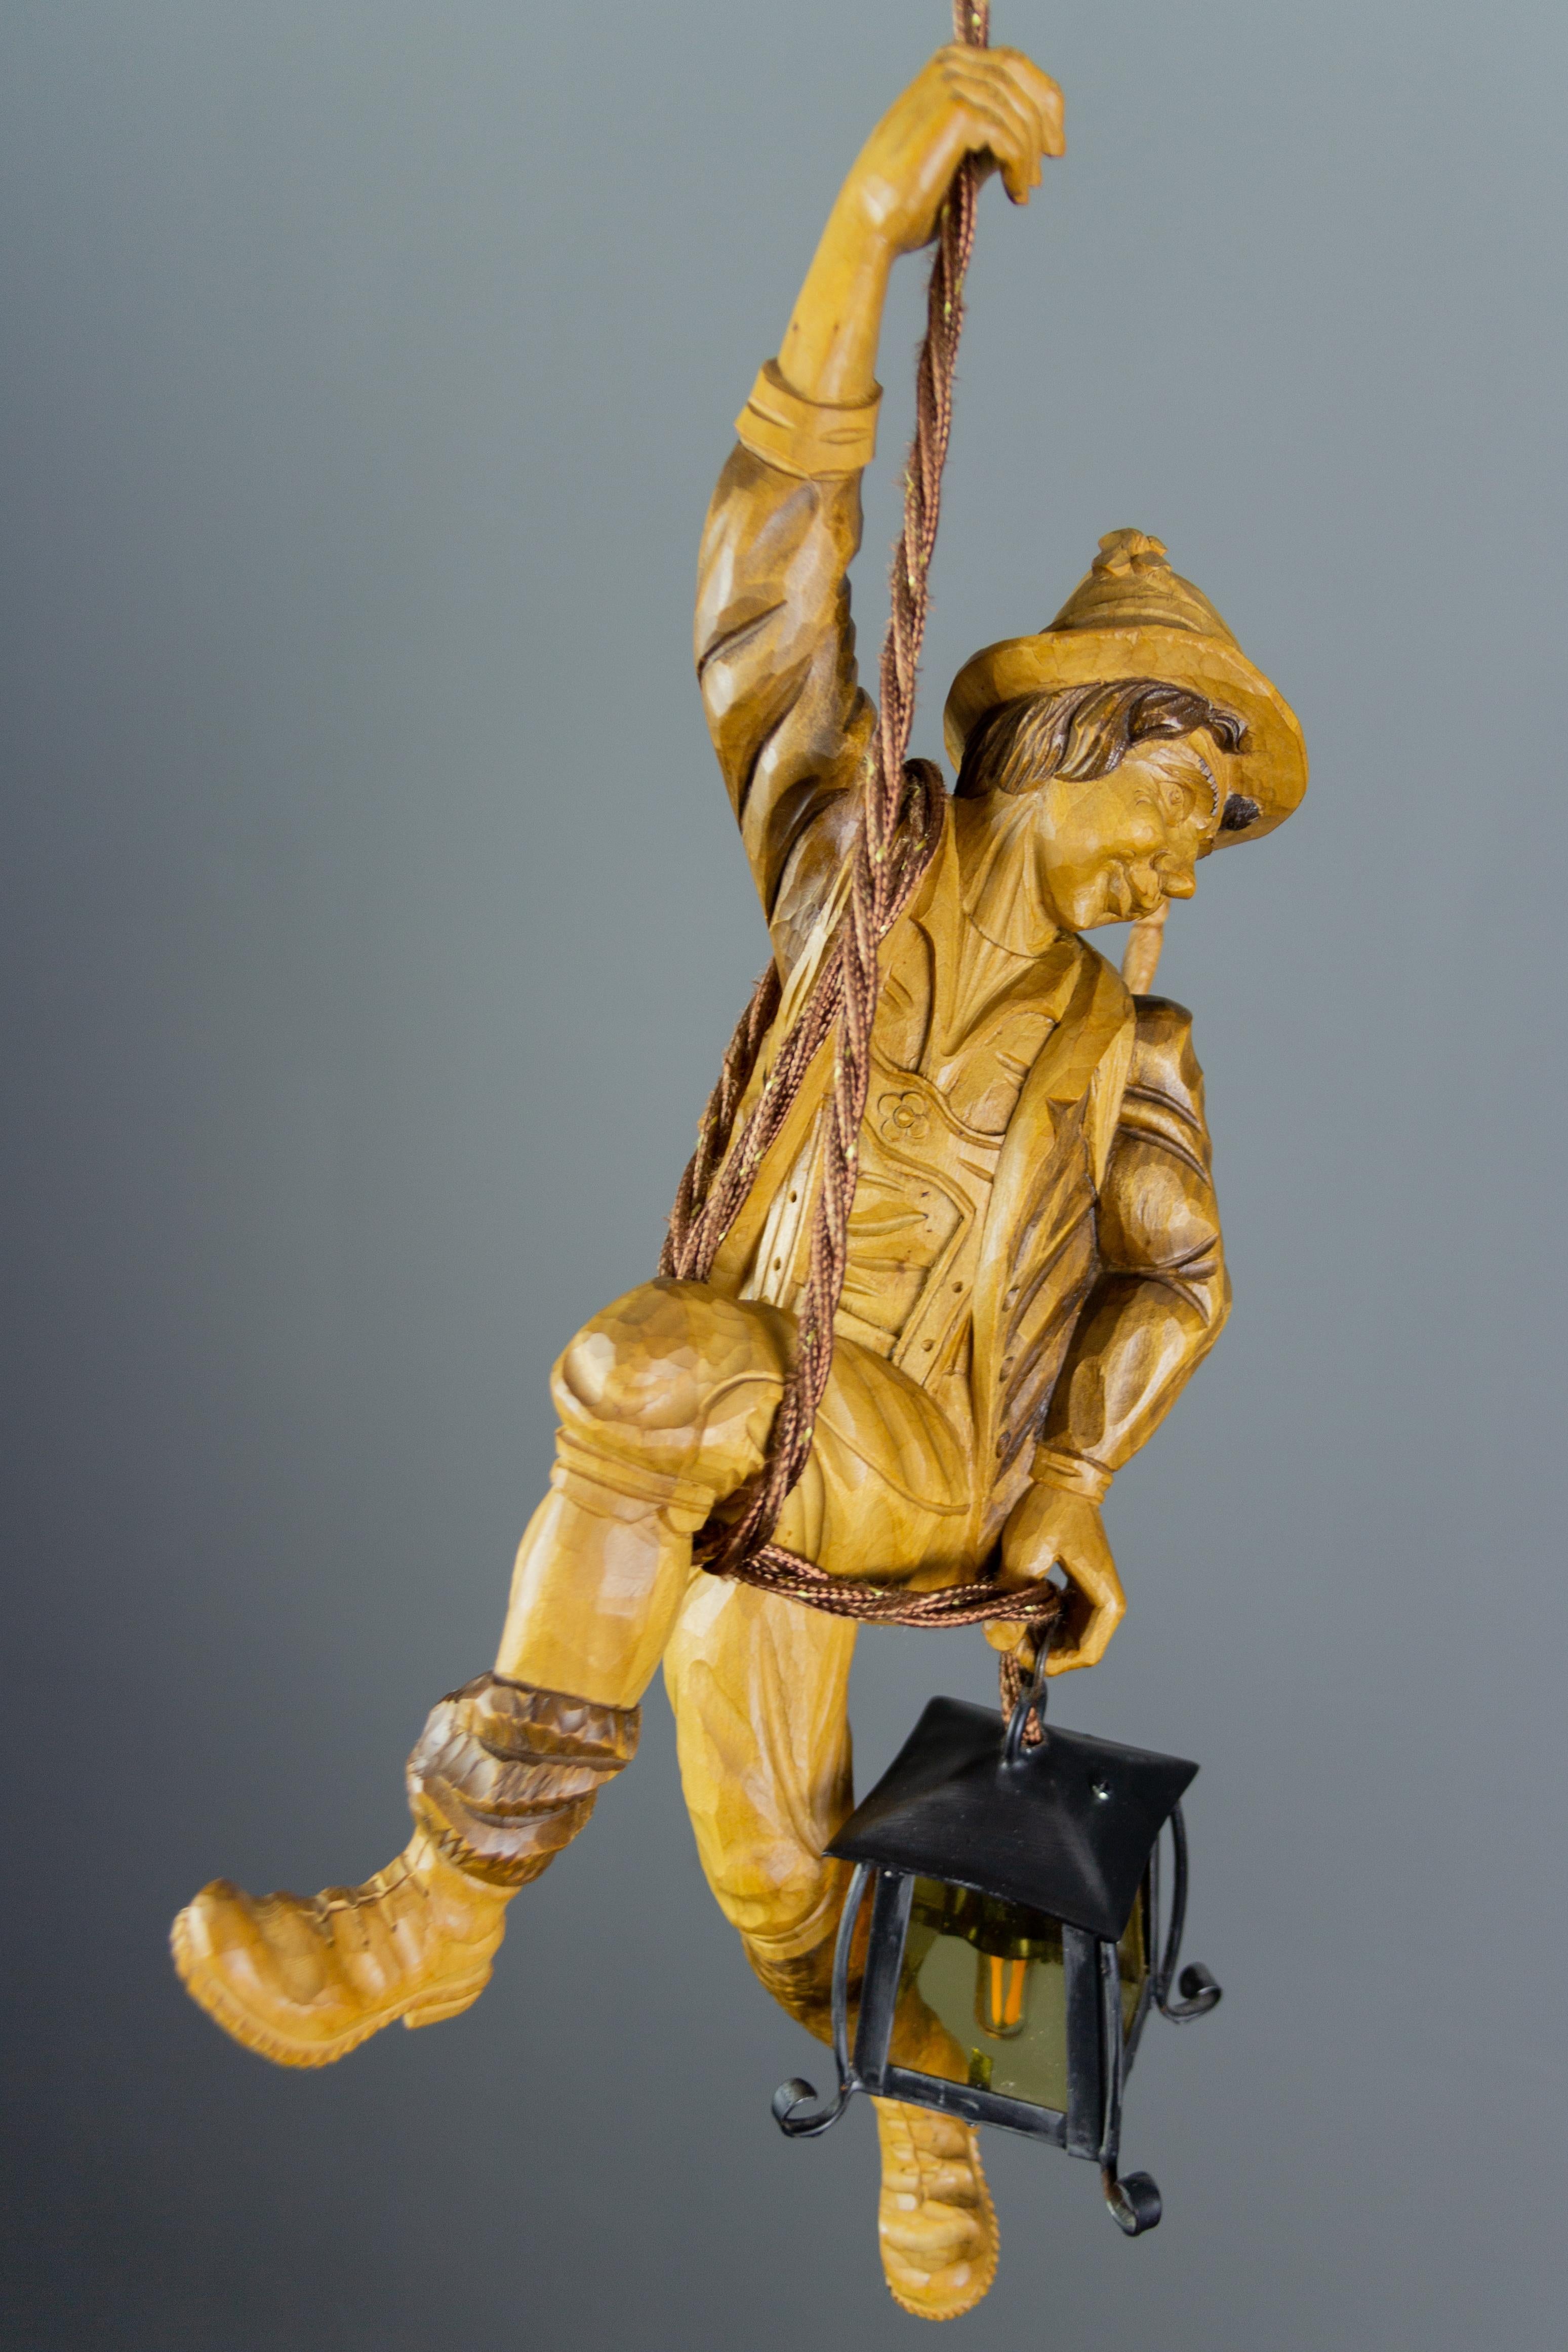 Wonderful German figural pendant lamp features a hand carved figure of a mountain climber in natural brown wood tones. The detailed carved wooden mountaineer with a backpack is holding onto a rope and holding a metal lantern with yellow glass in one